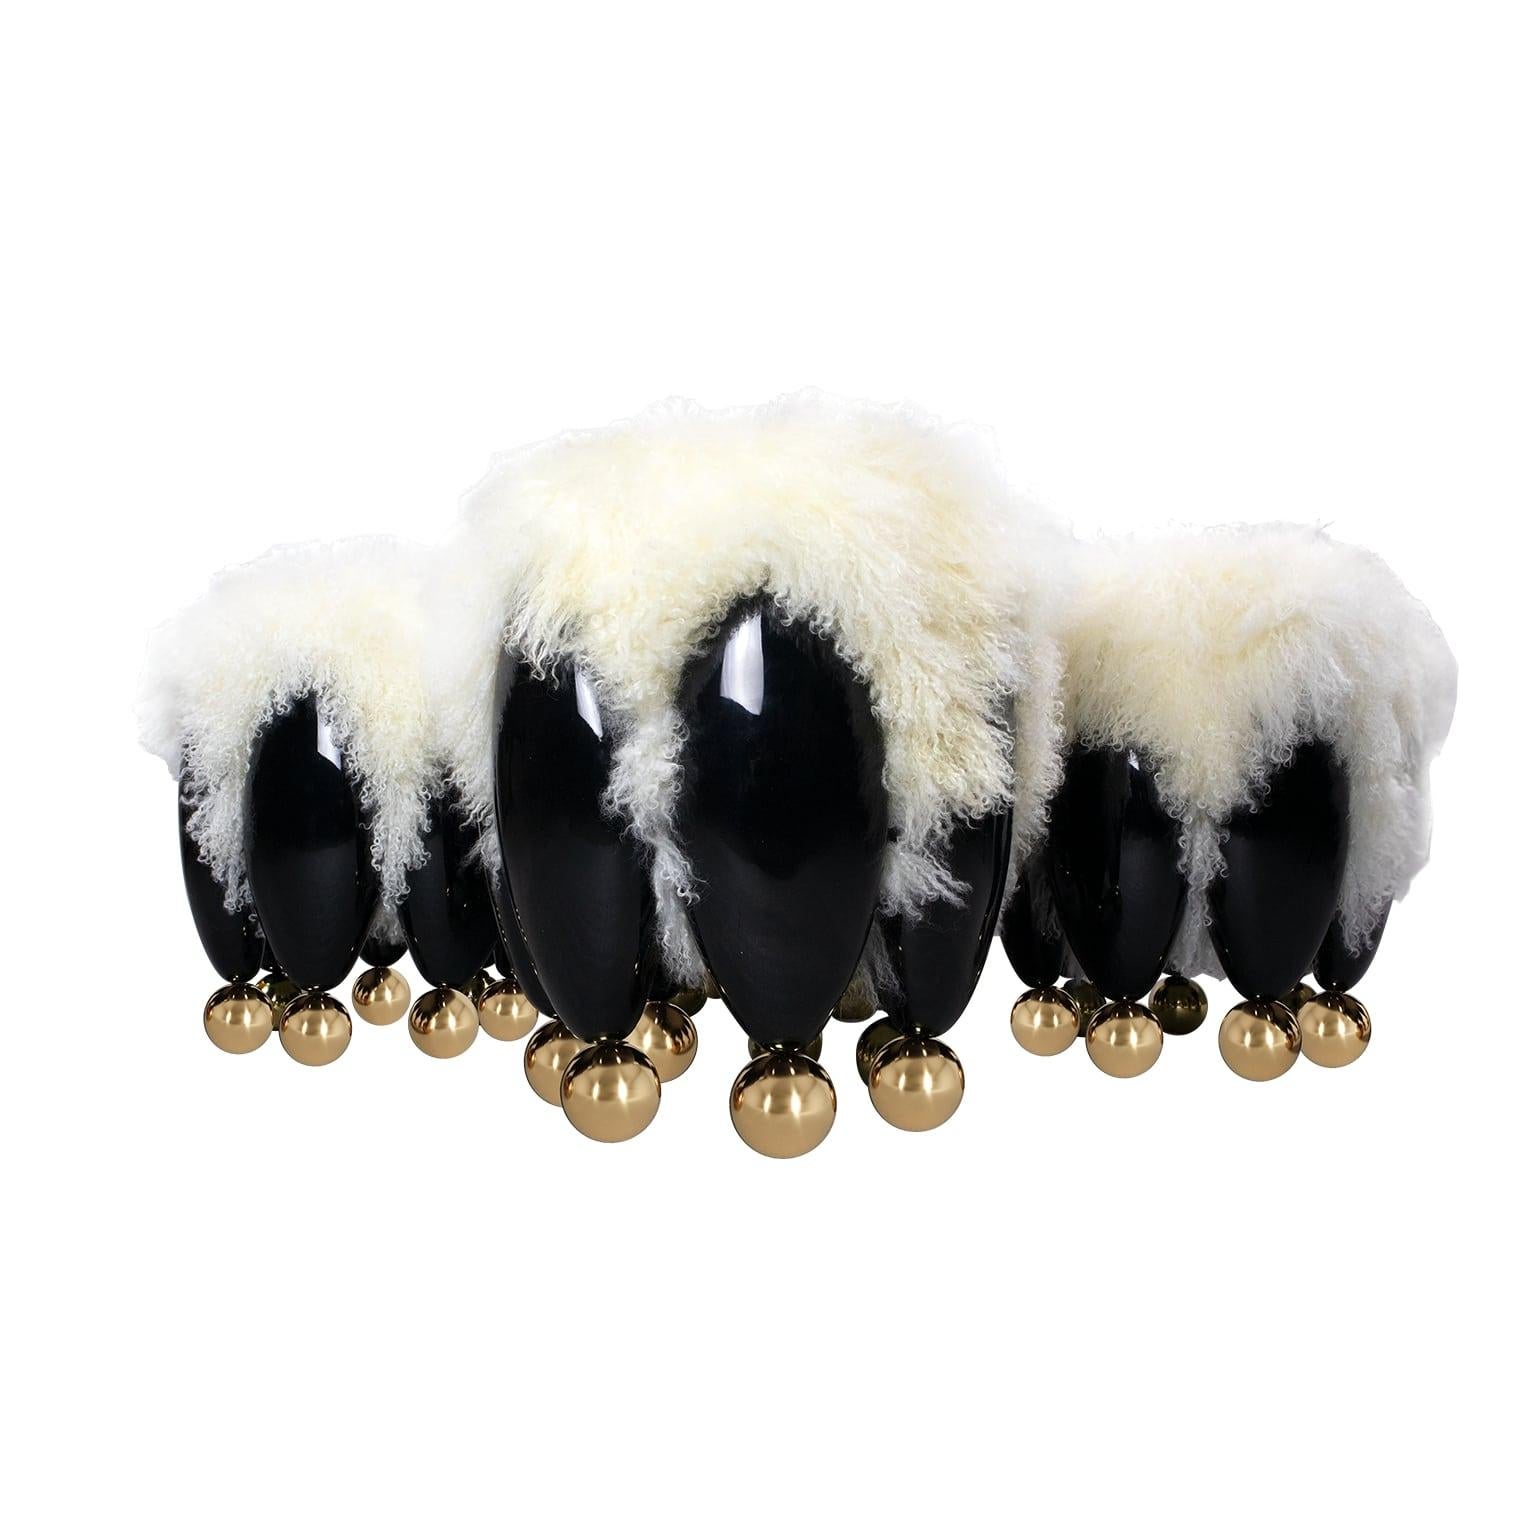 Lunarys Stool is a luxury stool ideal for any contemporary interior design project. A modern stool design, upholstered in fur with polished brass details, made to enhance your home experience. It results from a supreme and provocative design,